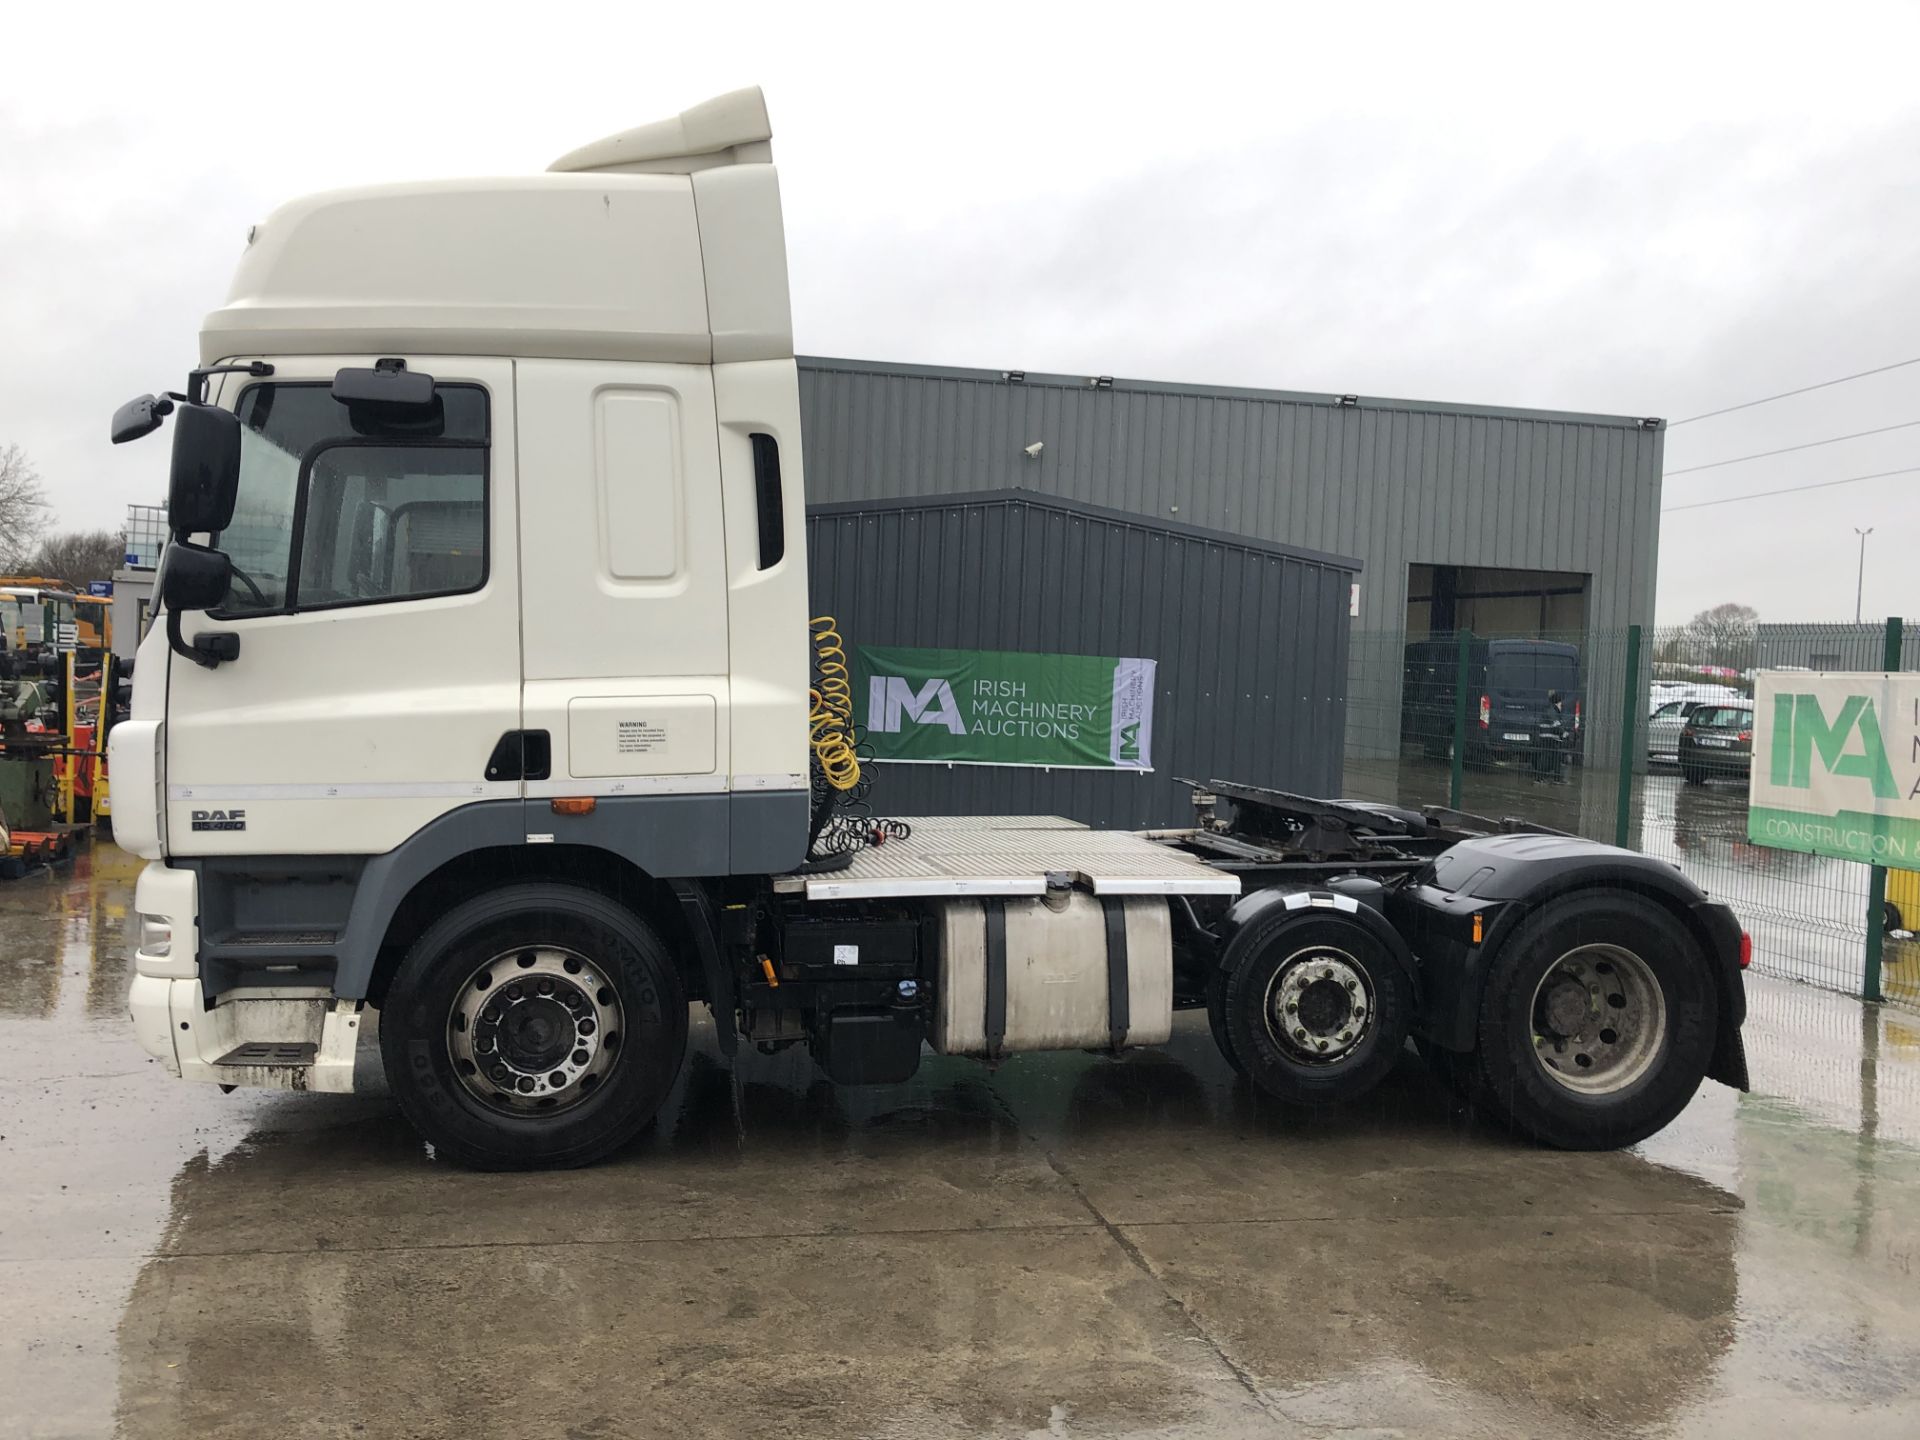 132OY735 2013 DAF FTP CF85.460 Truck - Image 2 of 21